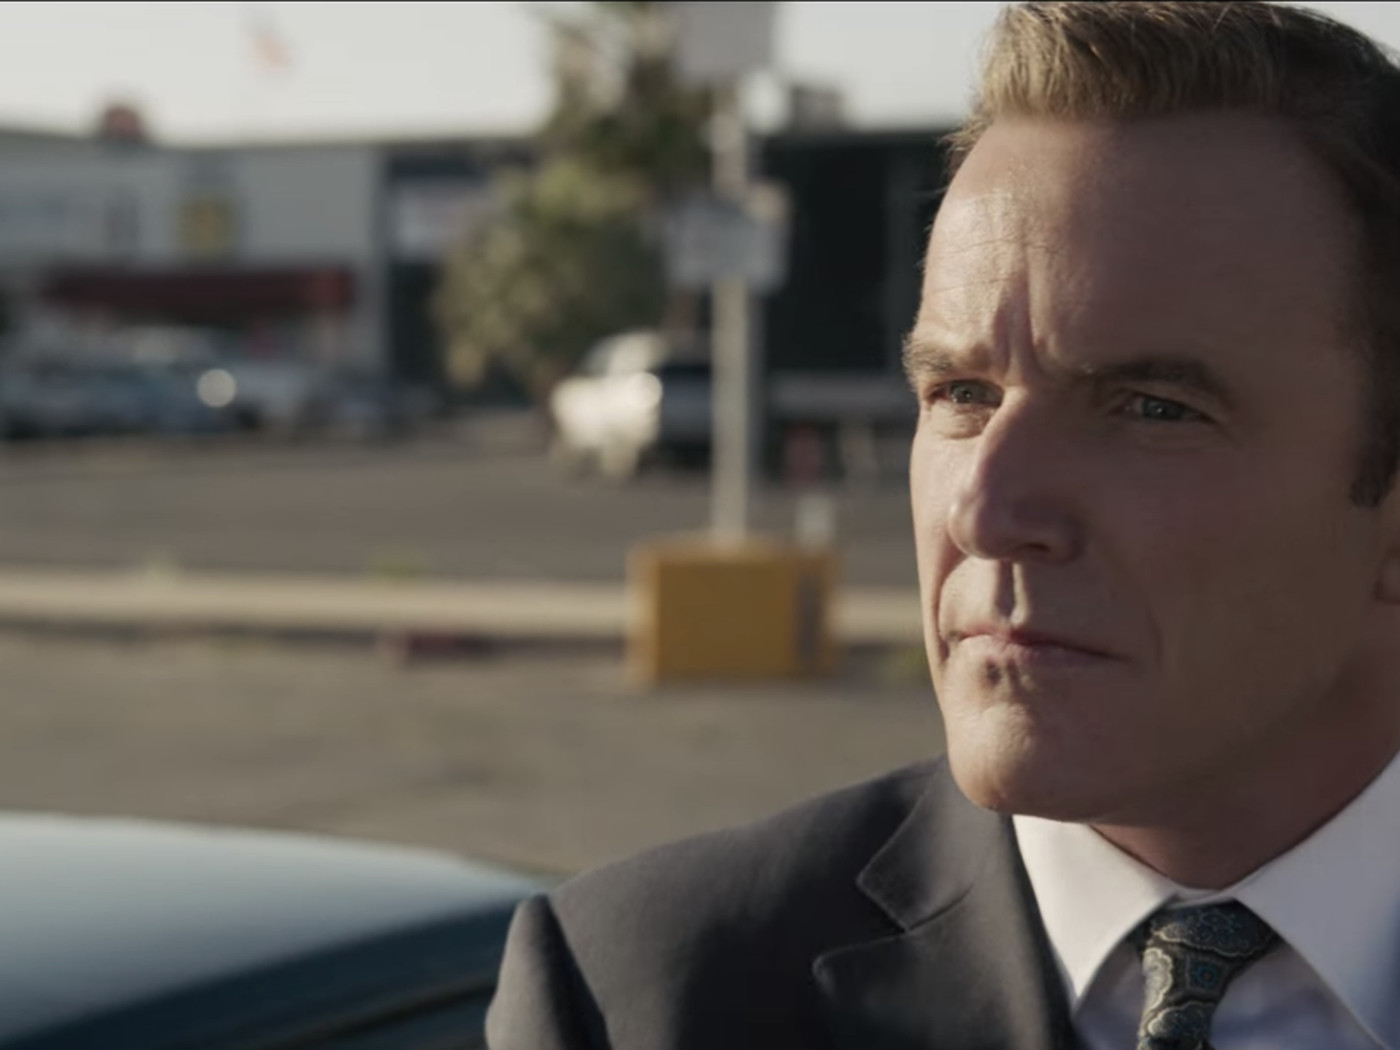 Agent Coulson Captain Marvel